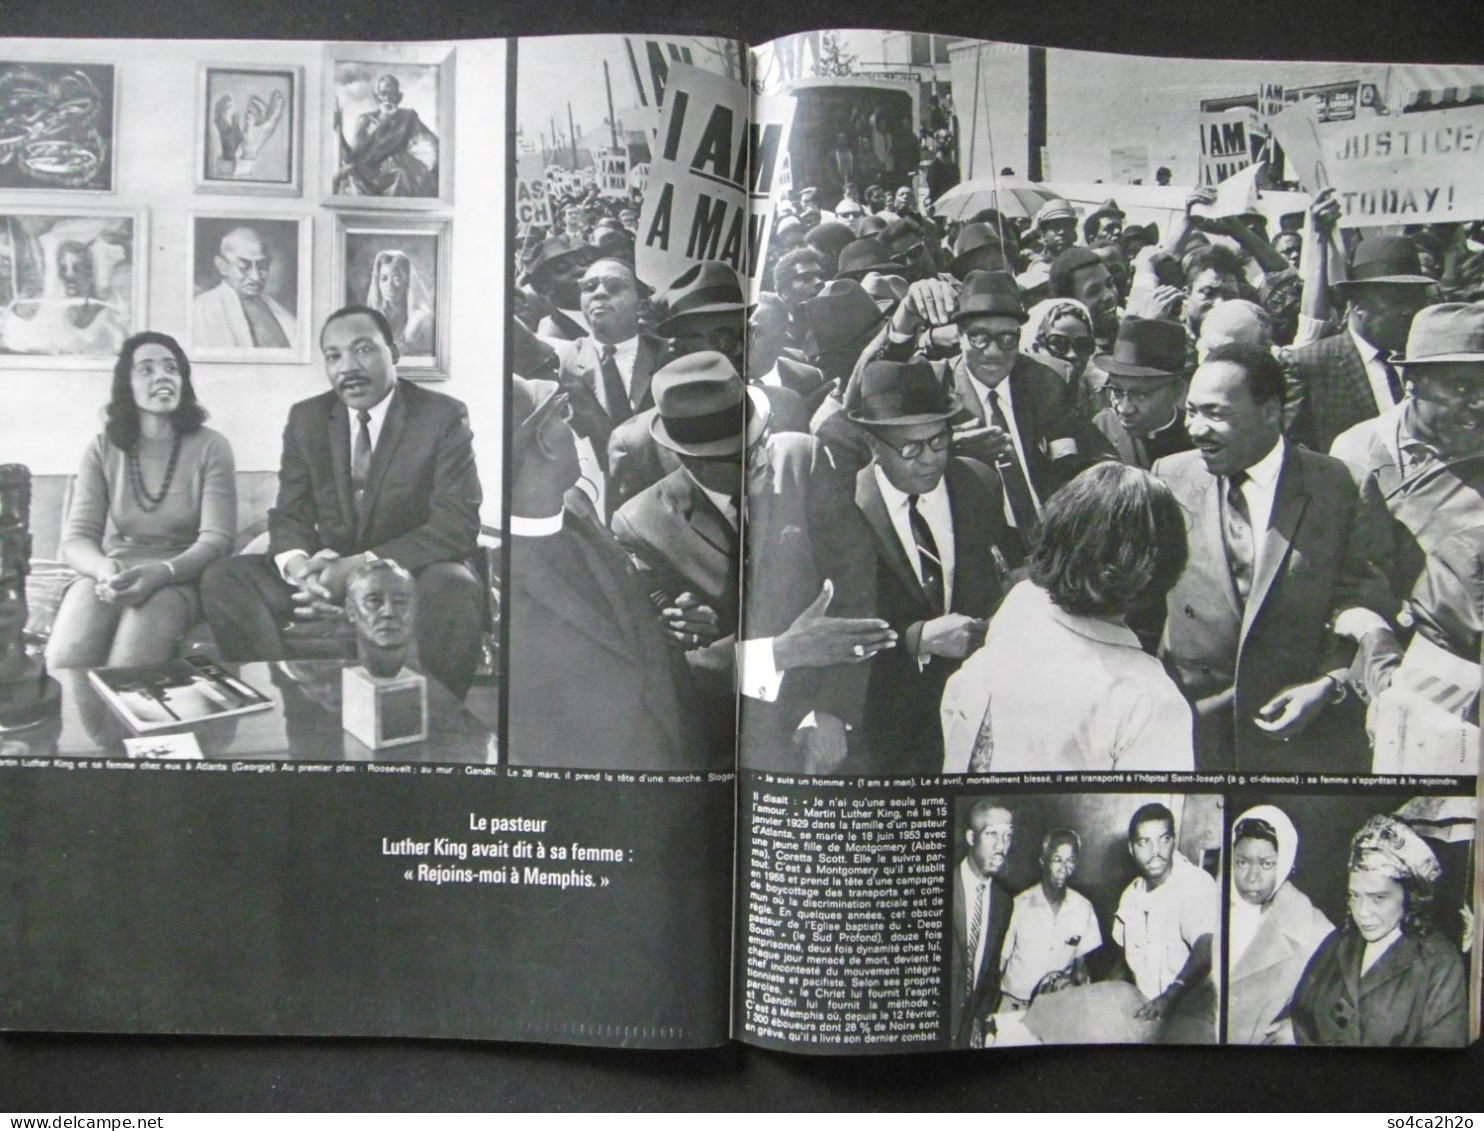 Paris Match N°992 13 Avril 1968 L'assassinat De Martin Luther King, Mort Comme Kennedy - General Issues